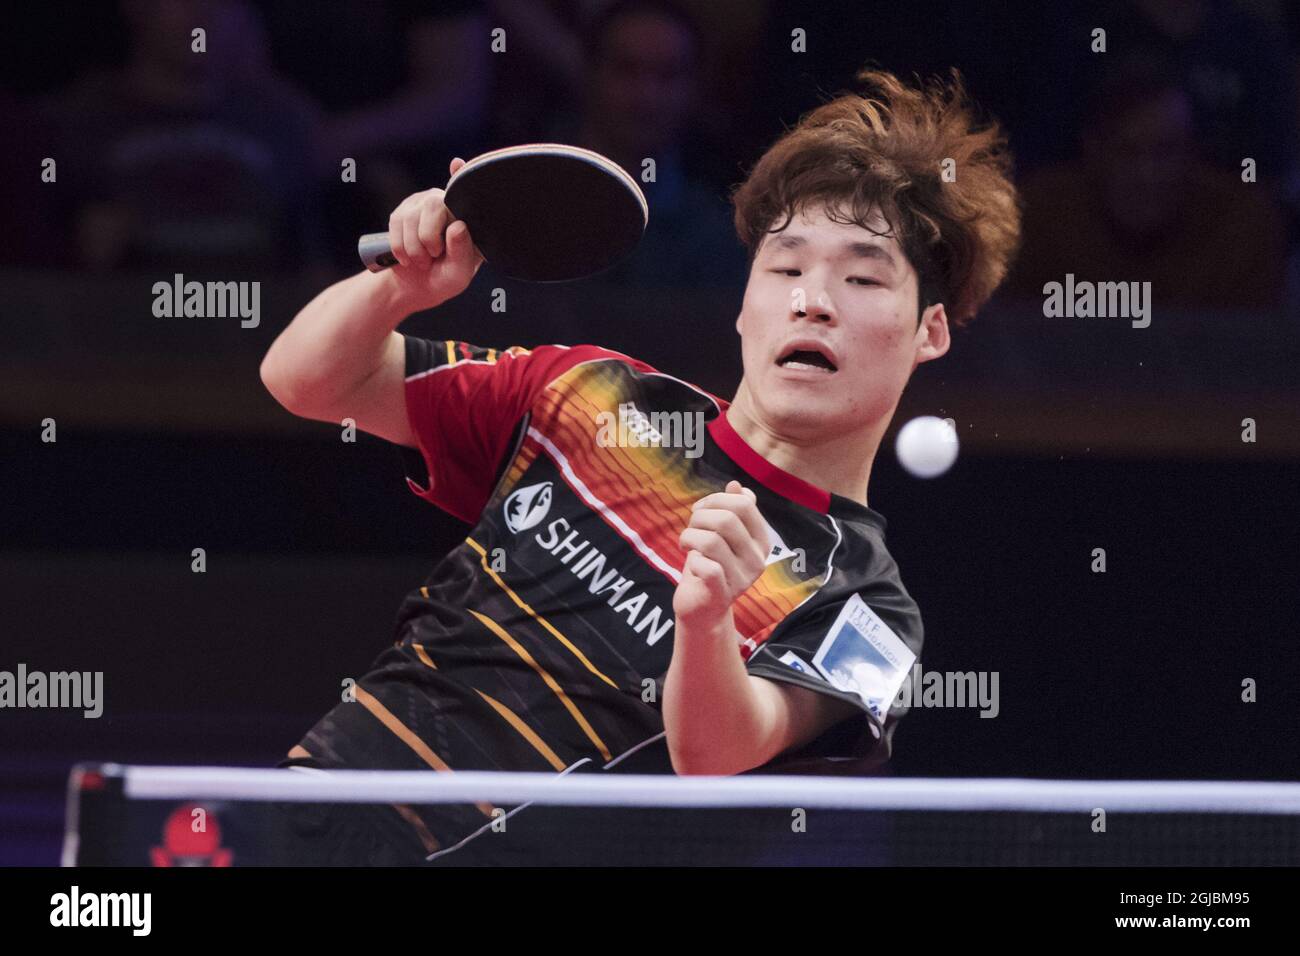 Jang Woojin of South Korea in action against Xu Xin of China during the men's quarterfinal table tennis match at the Swedish Open Championships in Eriksdalshallen in Stockholm, Sweden, on Nov. 03, 2018. Photo: Stina Stjernkvist / TT / code 11610  Stock Photo